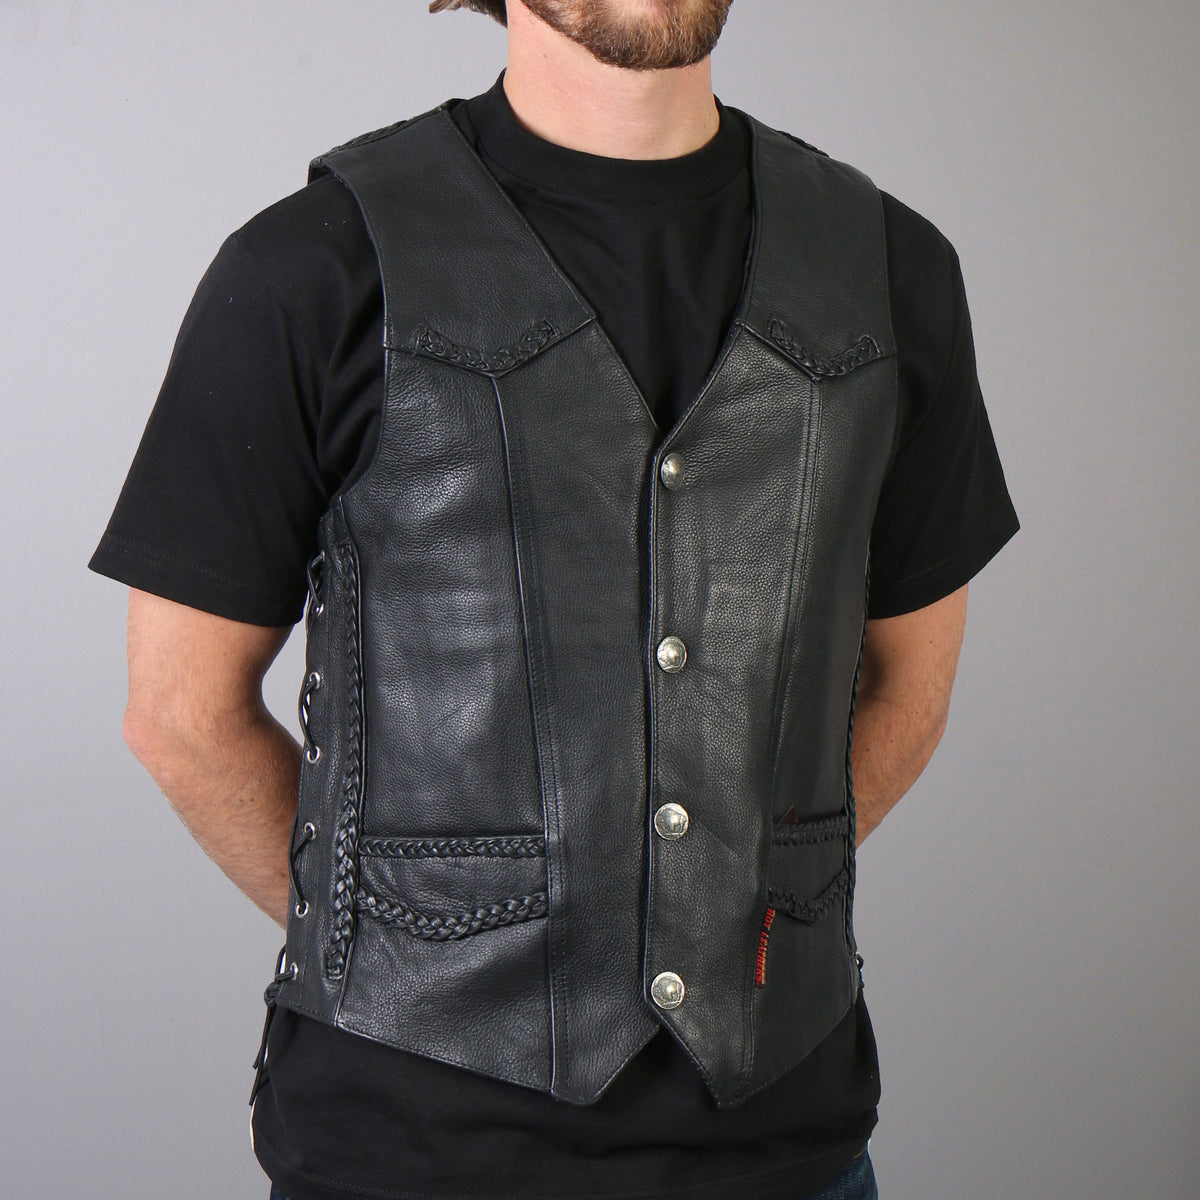 Details about   USA Made Buffalo Nickel Snap Premium Leather Vest 